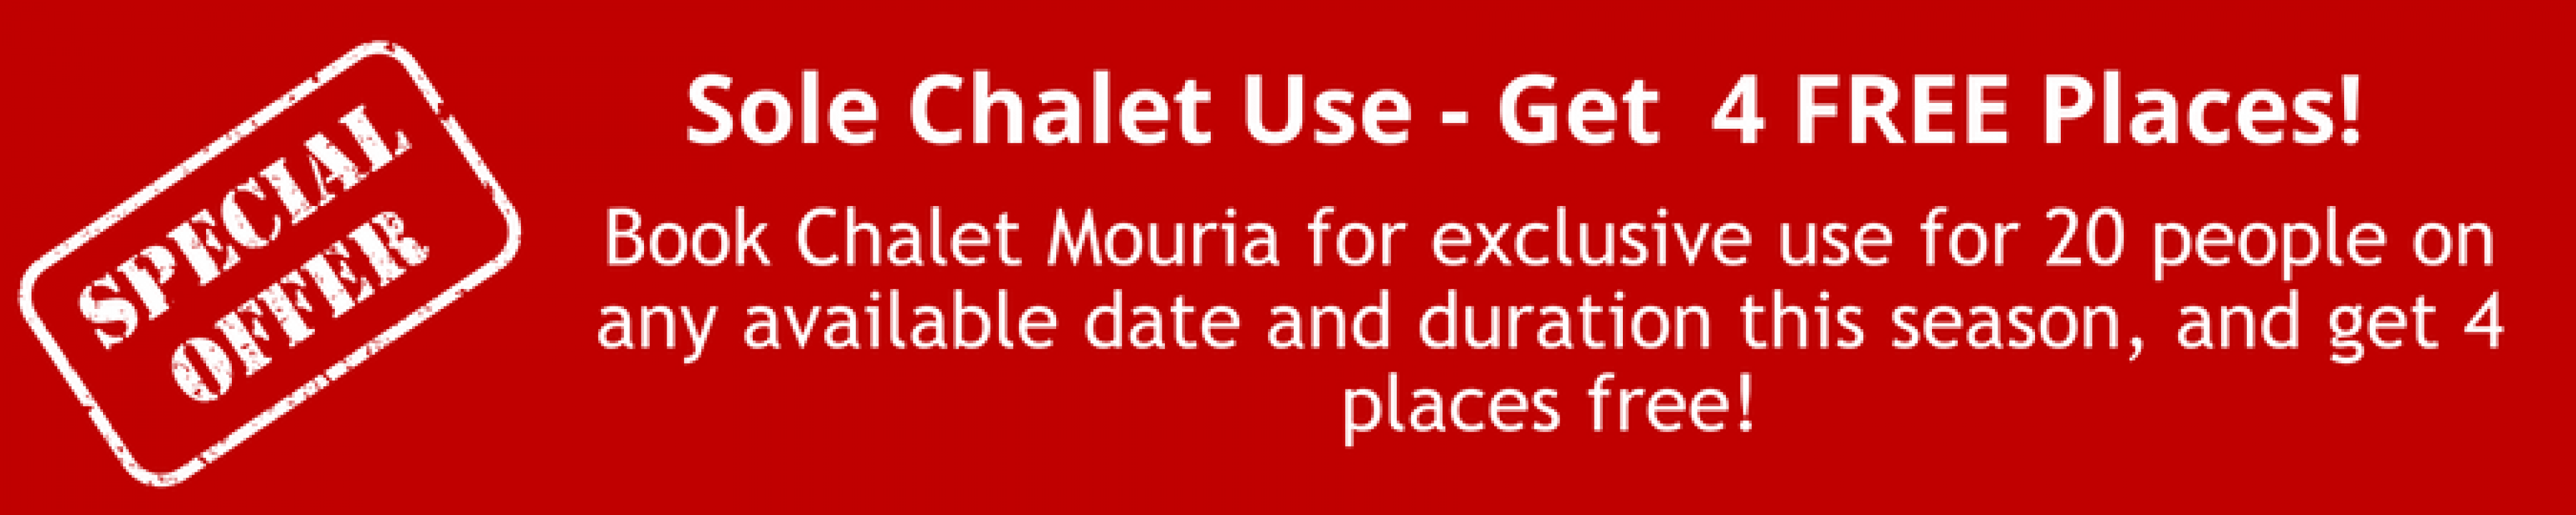 Chalet Mouria Group Offer